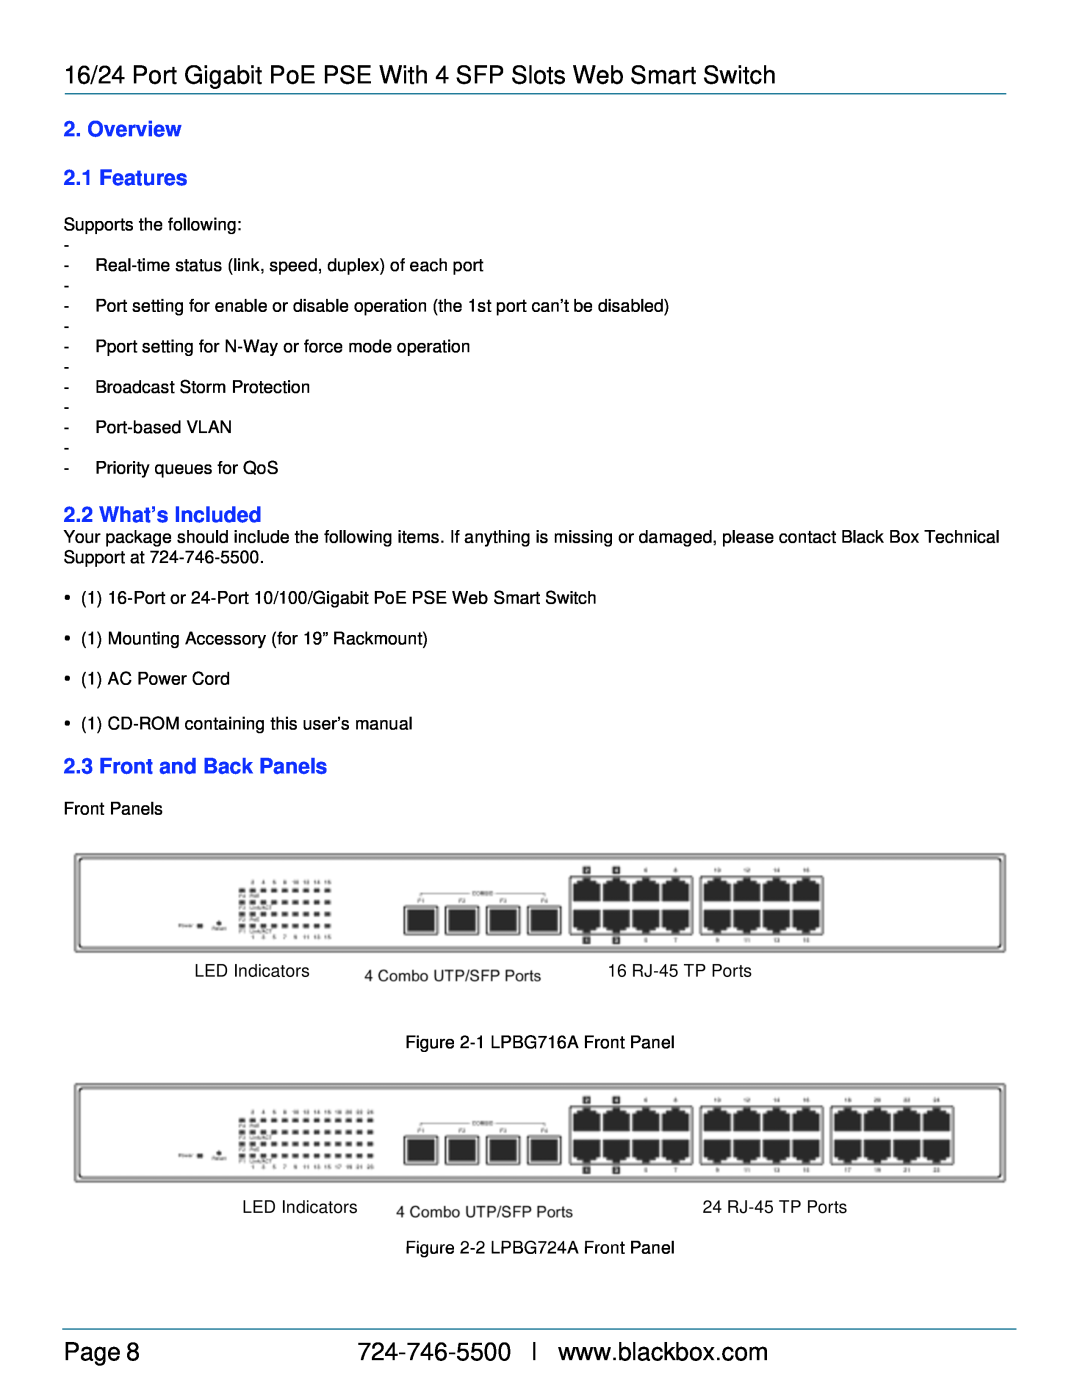 Black Box 16-/24-Port Gigabit PoE PSE Web Smart Switch with 4 SFP Slot manual Overview 2.1 Features, What’s Included, Page 